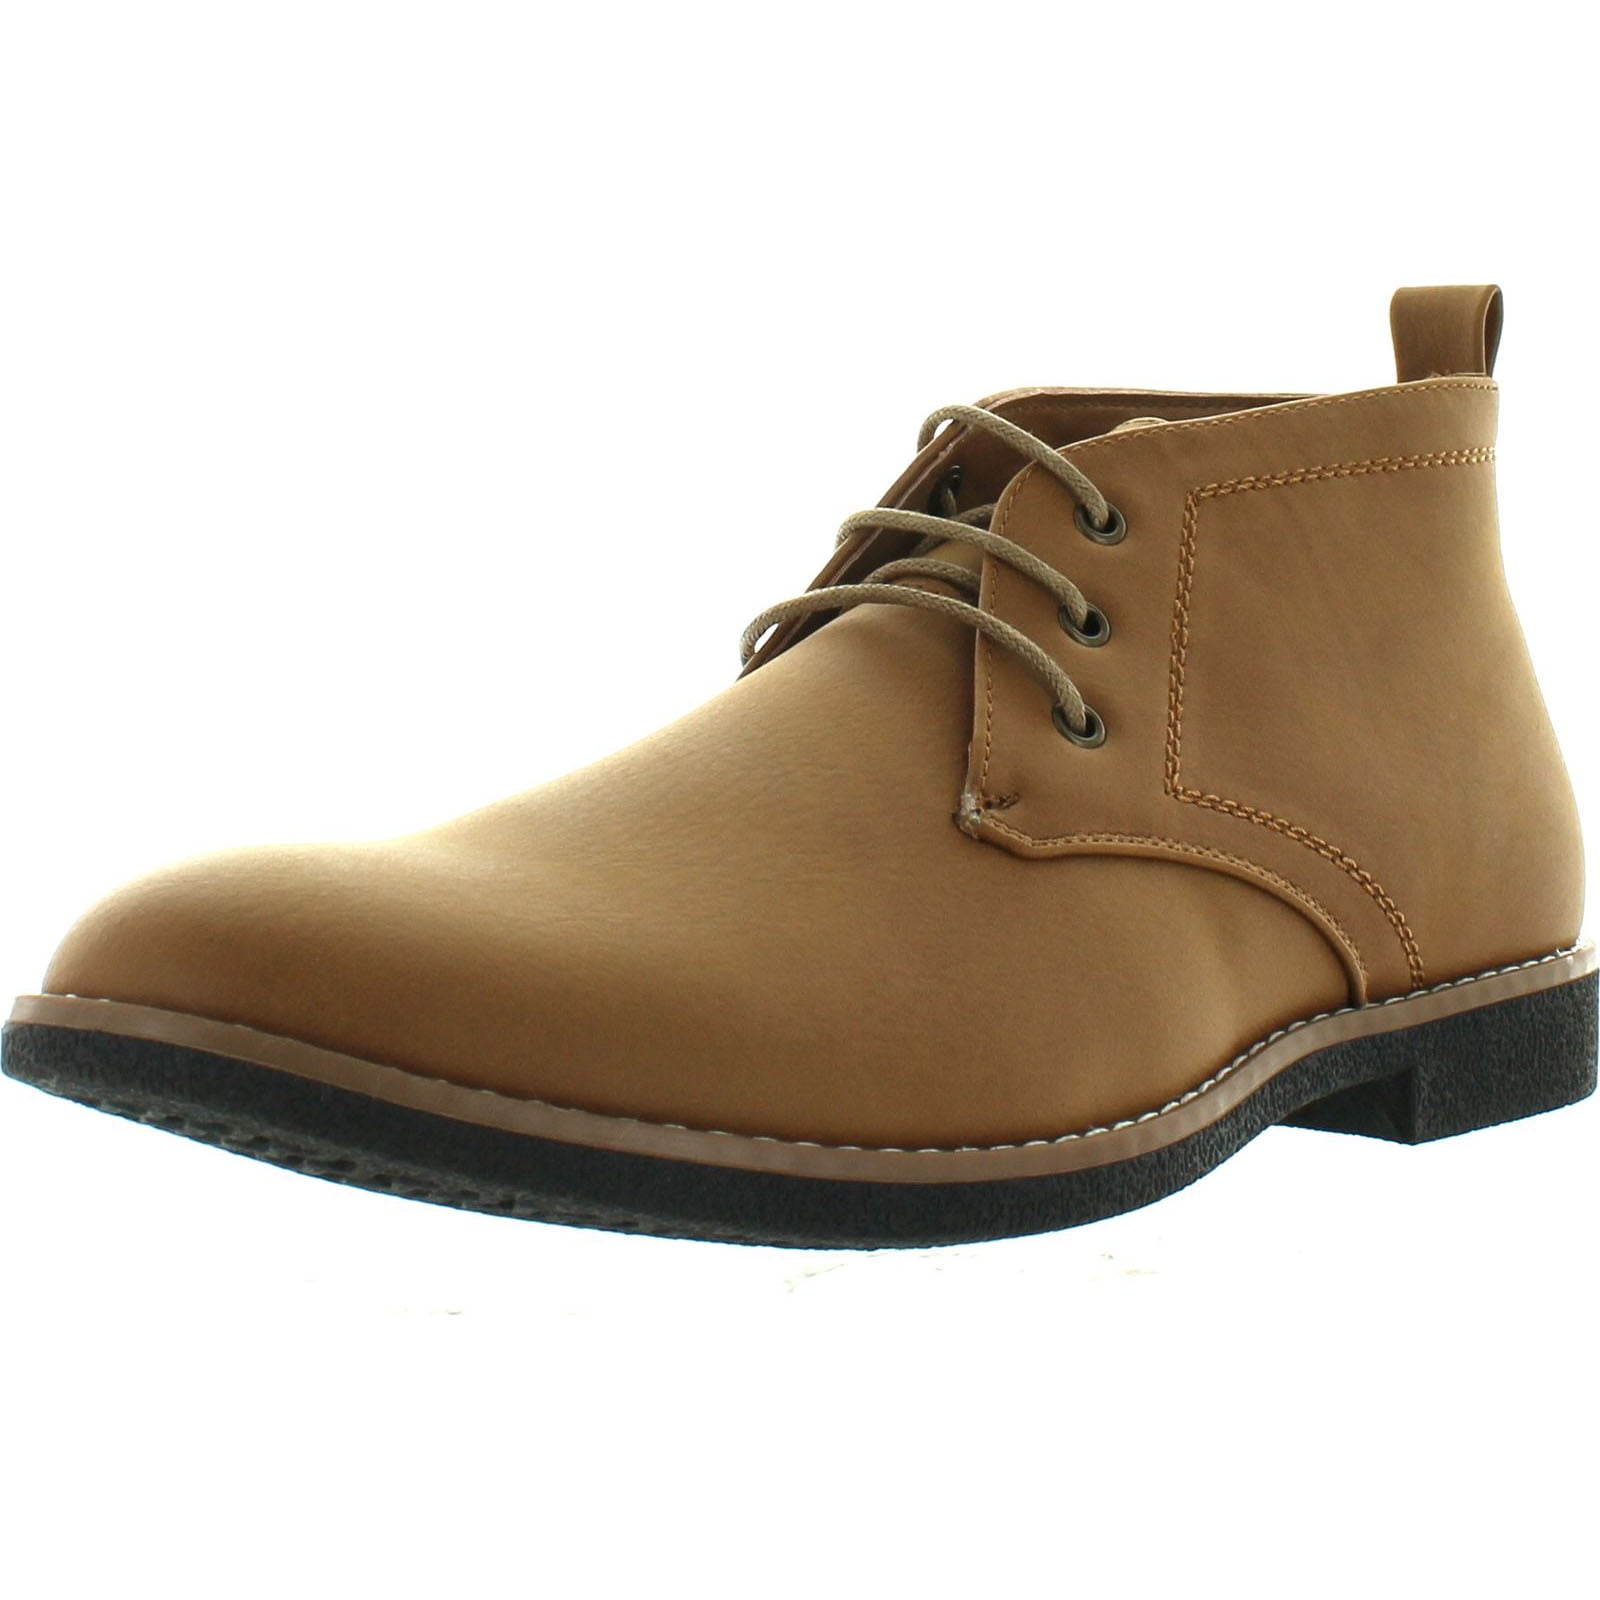 Arider COOPER-03 Men's High-Top Lace Up Chukka Ankle Booties, Camel, 7. ...